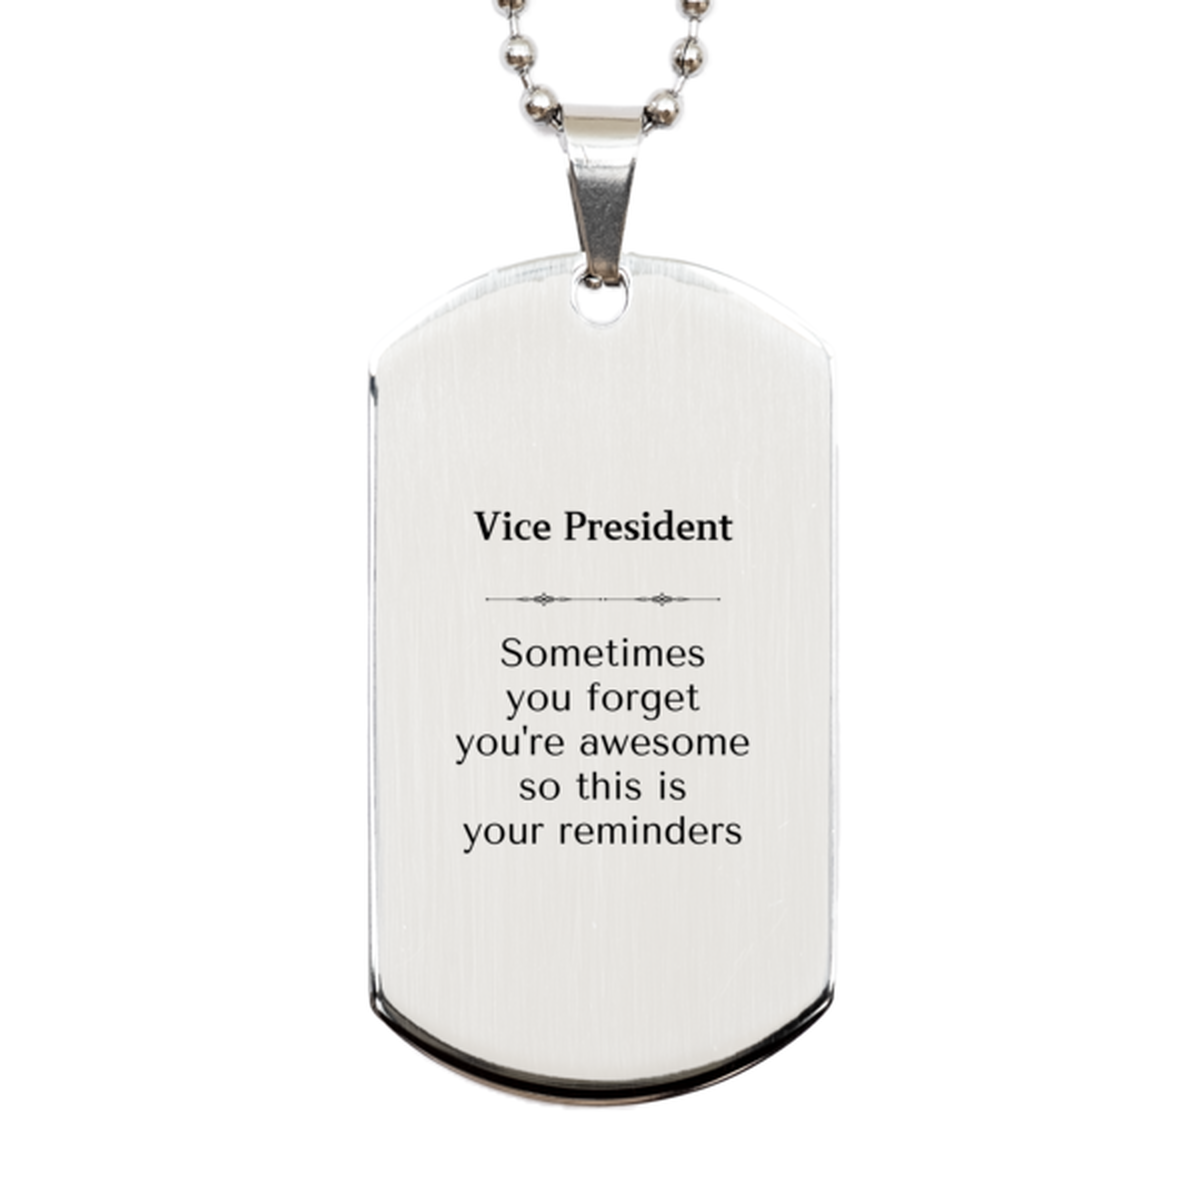 Sentimental Vice President Silver Dog Tag, Vice President Sometimes you forget you're awesome so this is your reminders, Graduation Christmas Birthday Gifts for Vice President, Men, Women, Coworkers